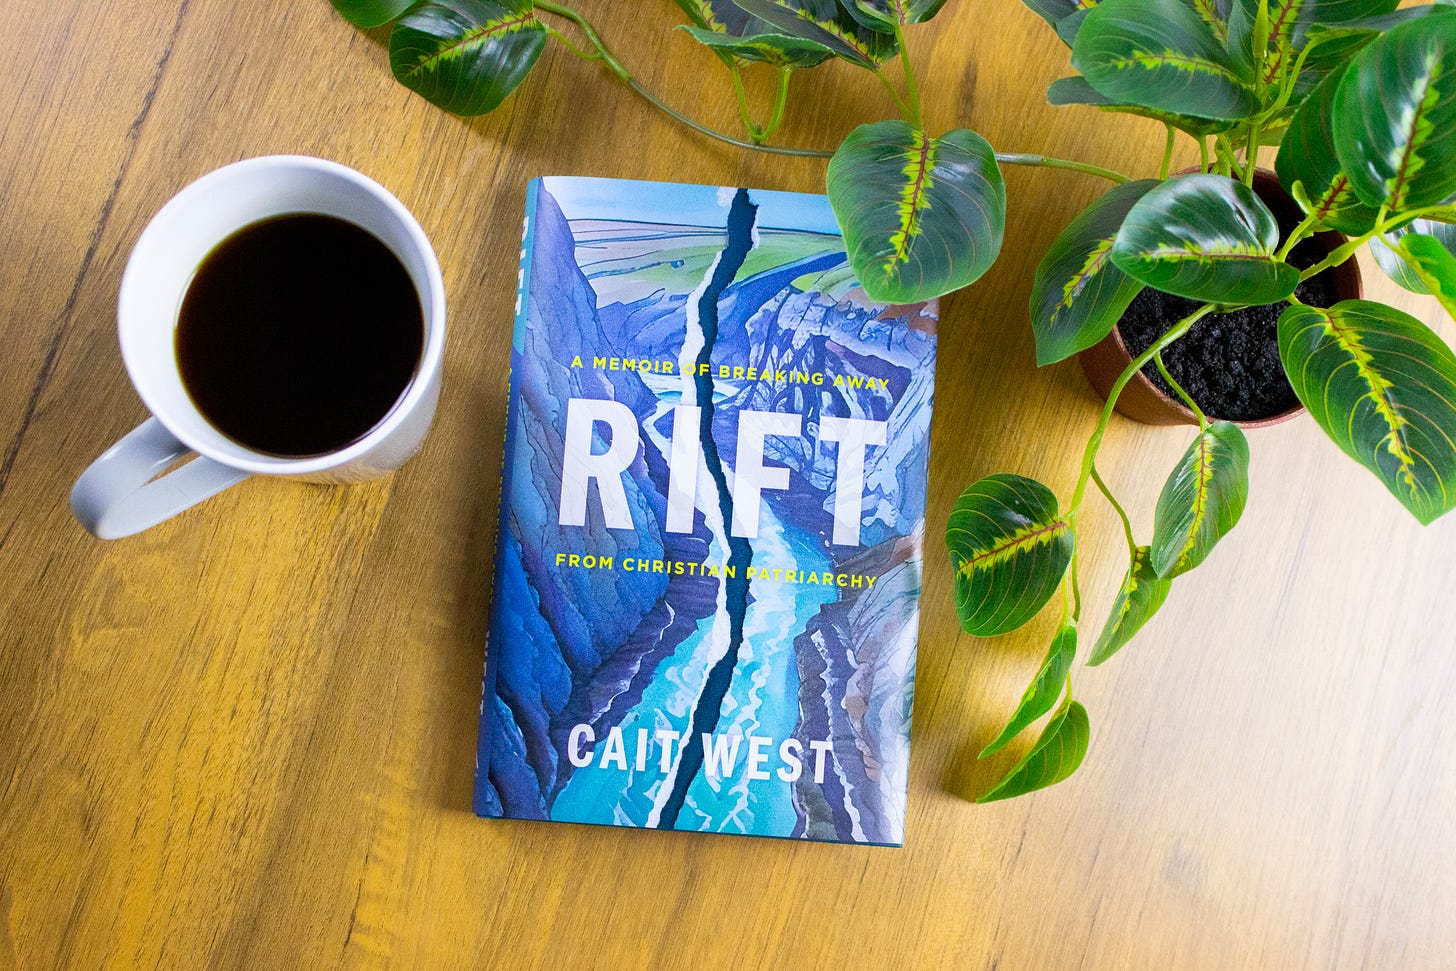 book Rift on a wooden table with a mug of coffee and a green plant